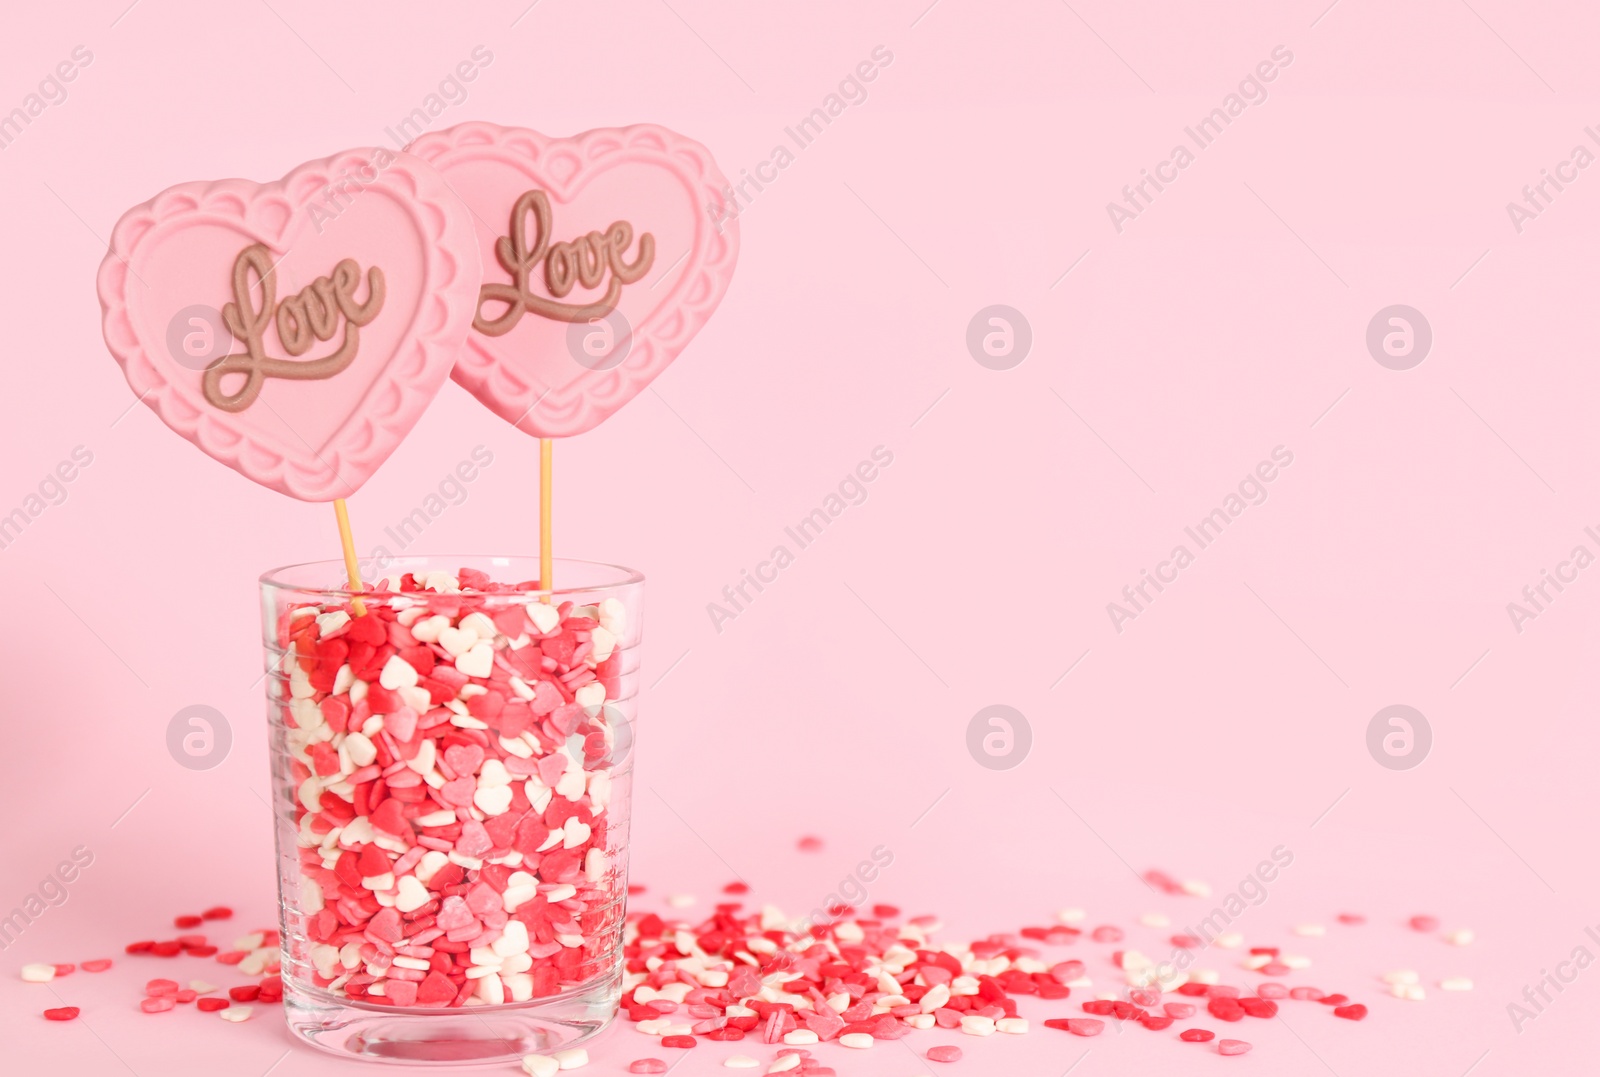 Photo of Chocolate heart shaped lollipops with word Love and sprinkles in glass on light pink background. Space for text